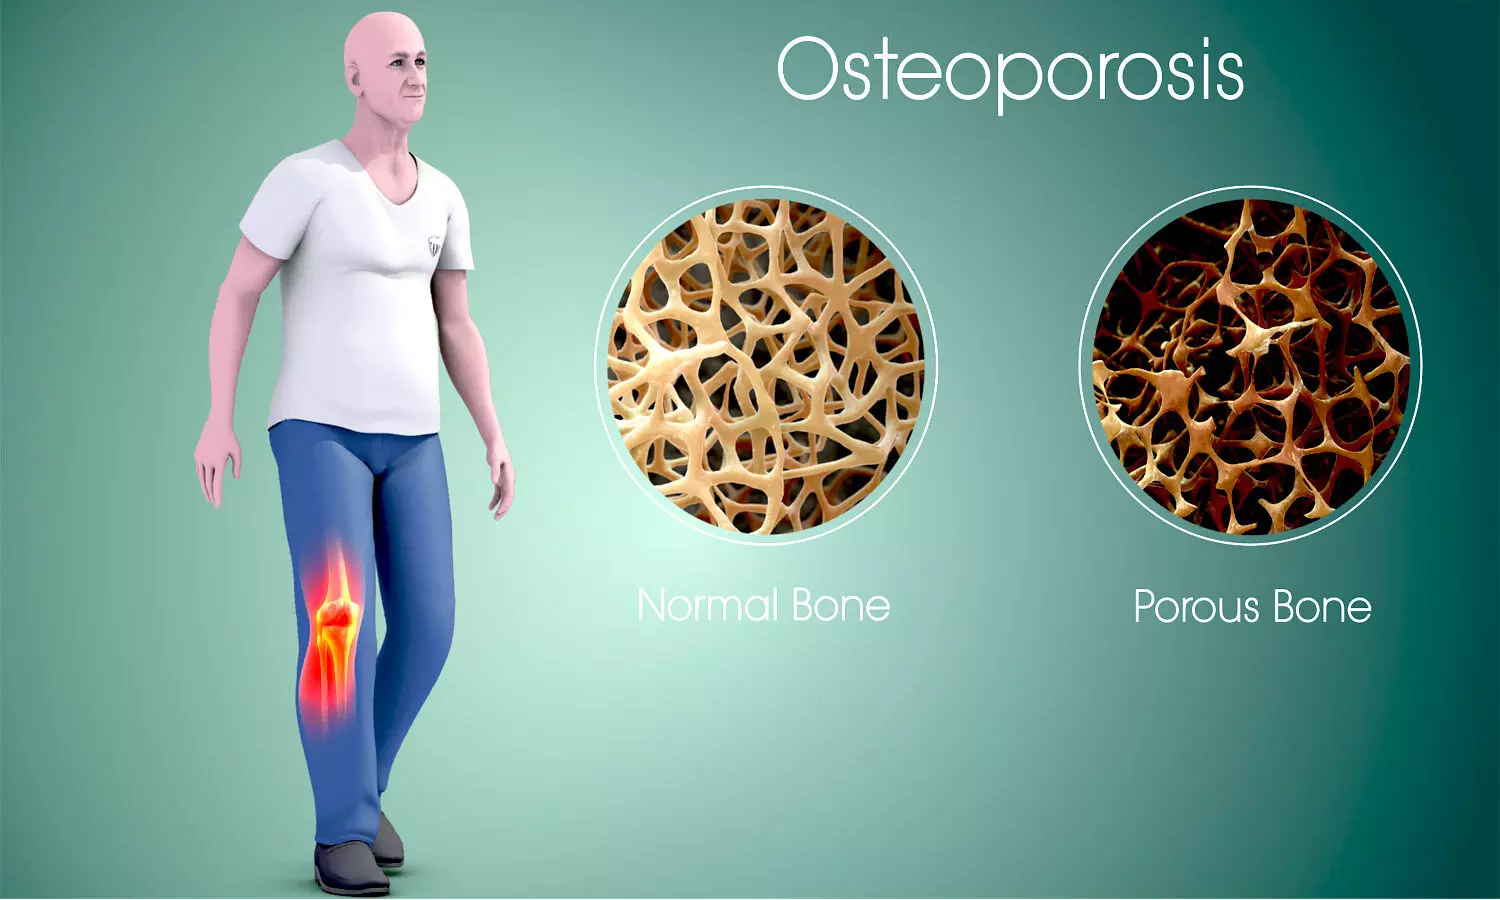 Common osteoporosis medication boosts immune response in lungs